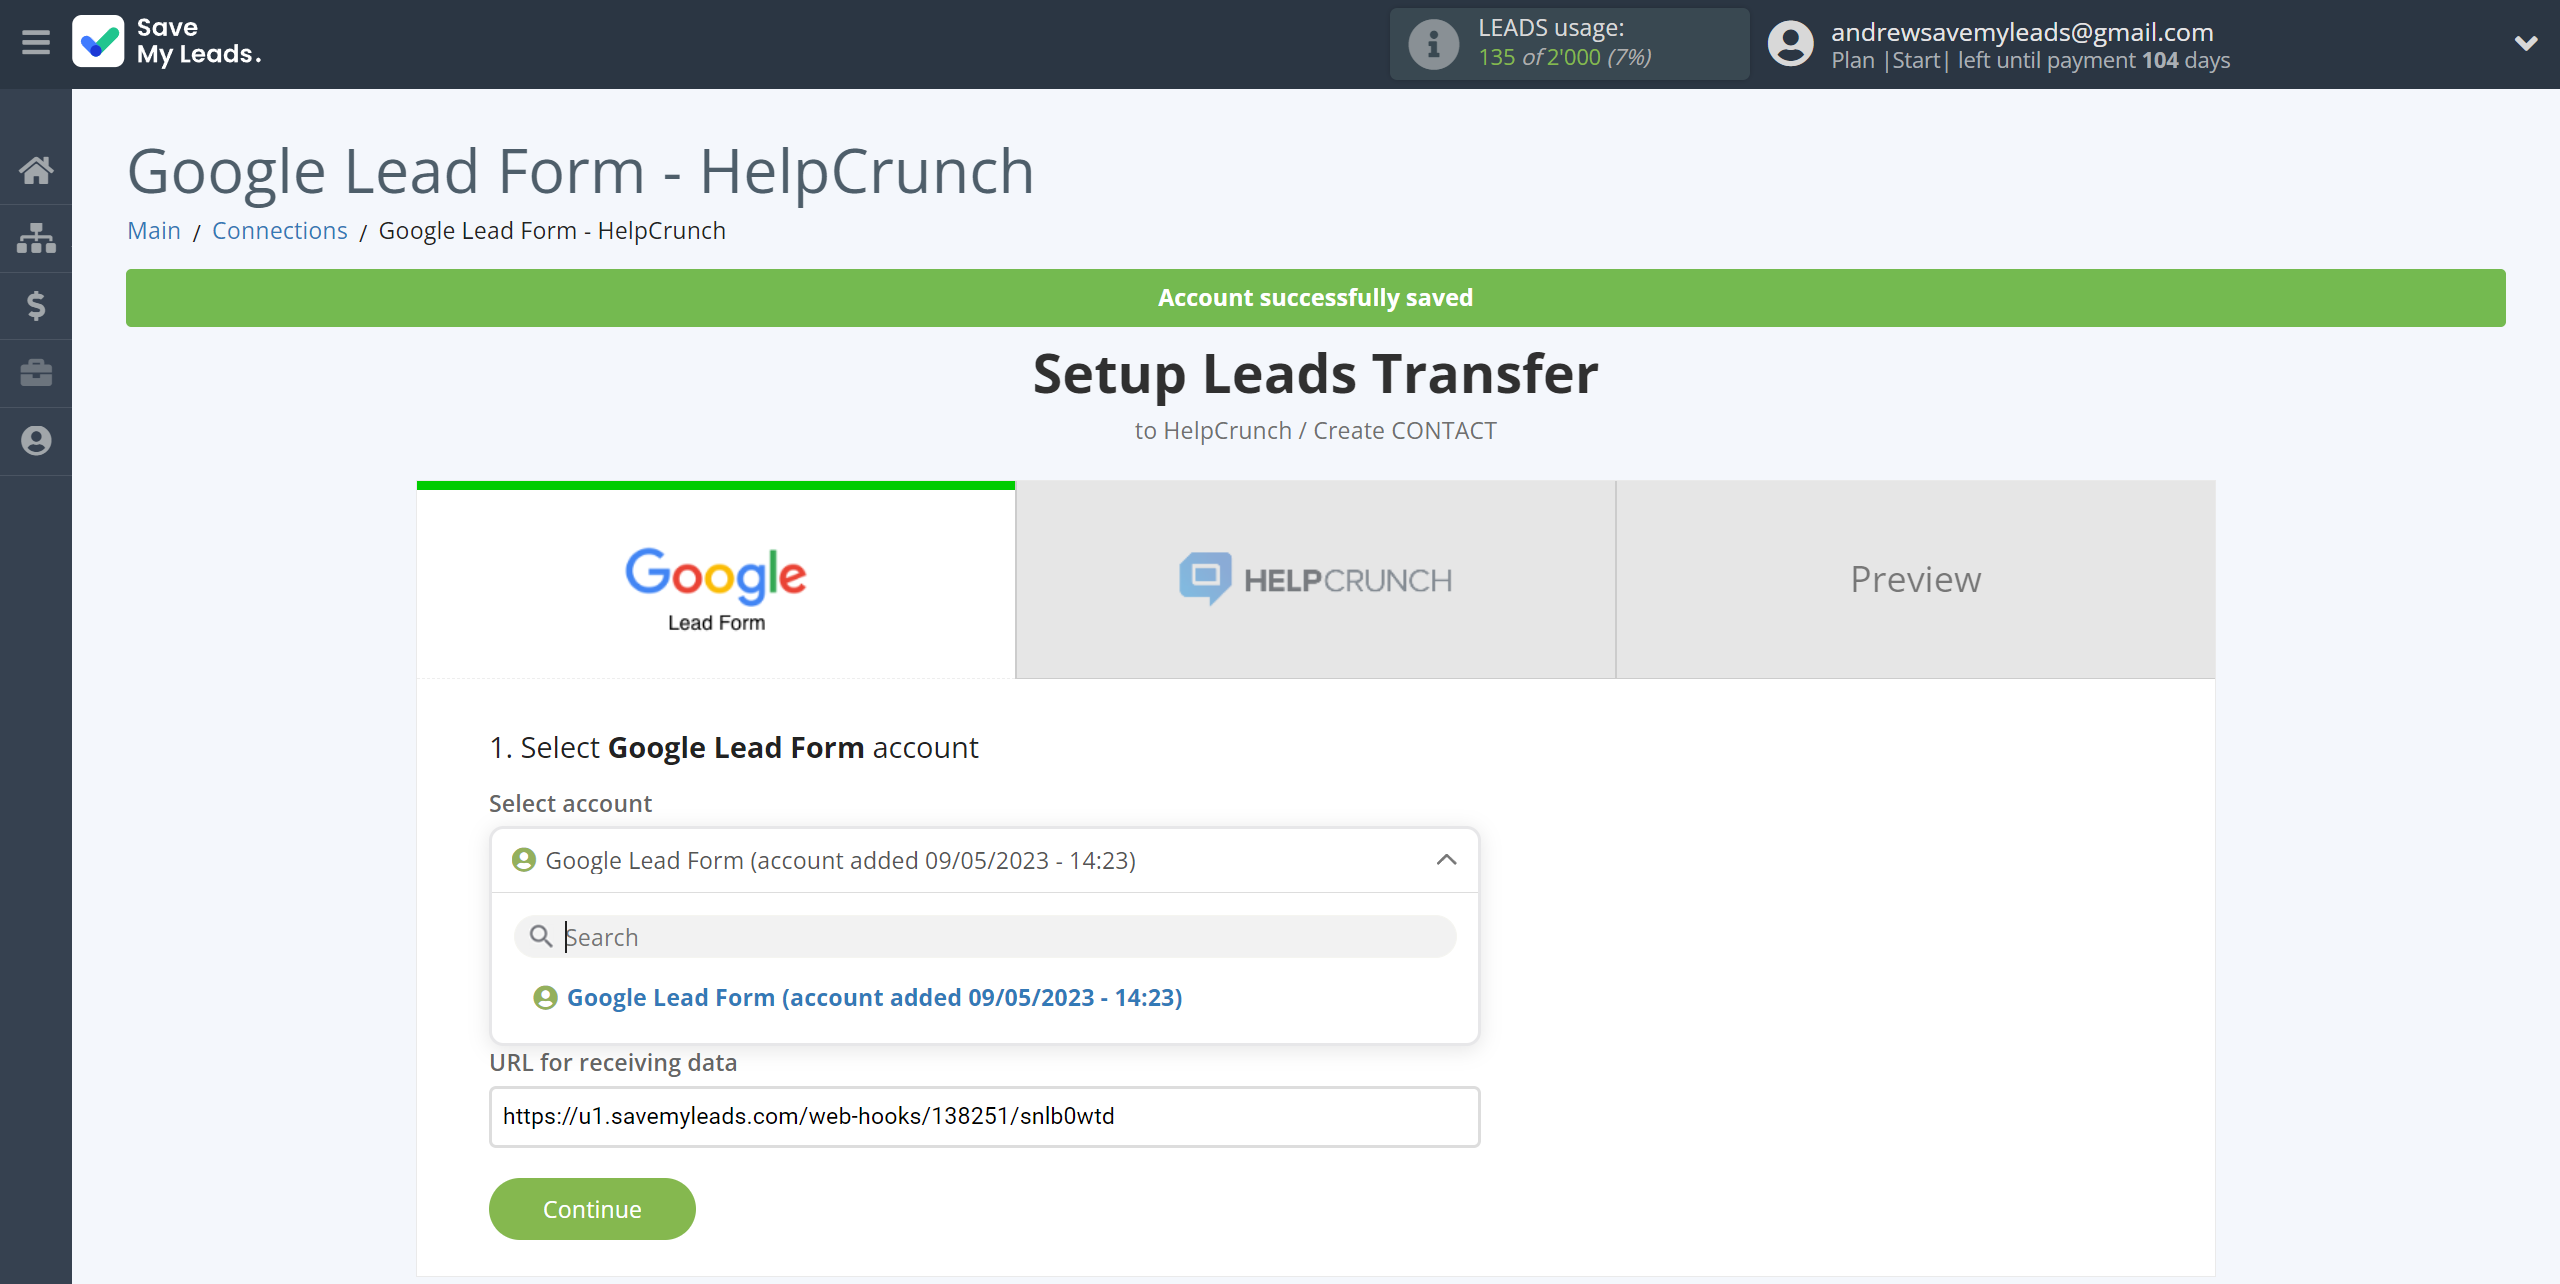 How to Connect Google Lead Form with HelpCrunch Create Contacts | Data Source account selection